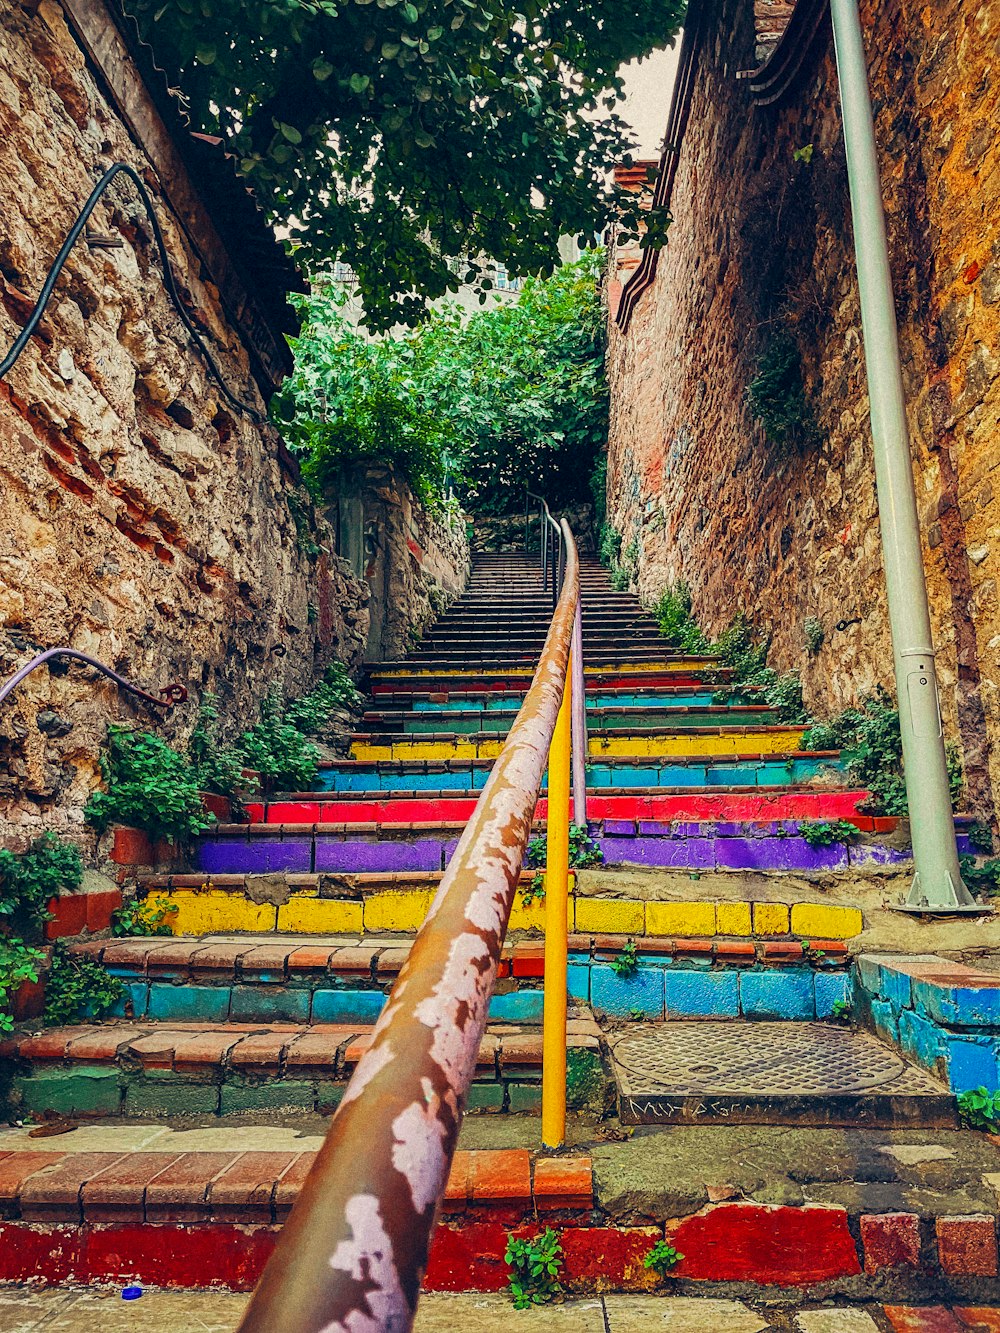 a set of stairs painted in different colors